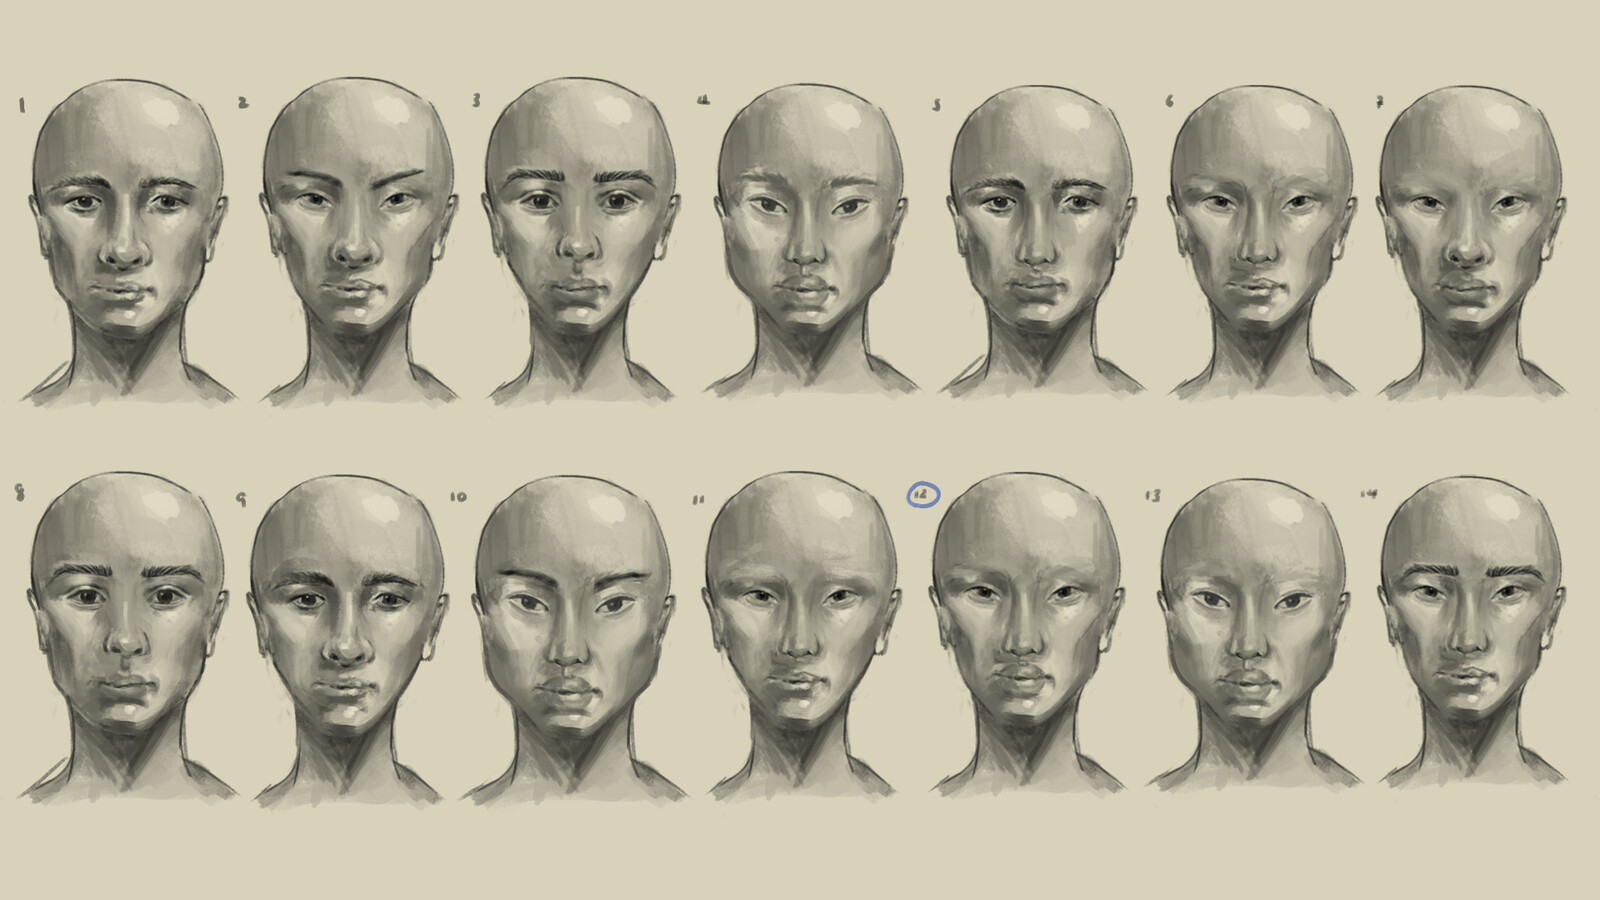 More face variations - working with mixing features I liked from my first set of variations.